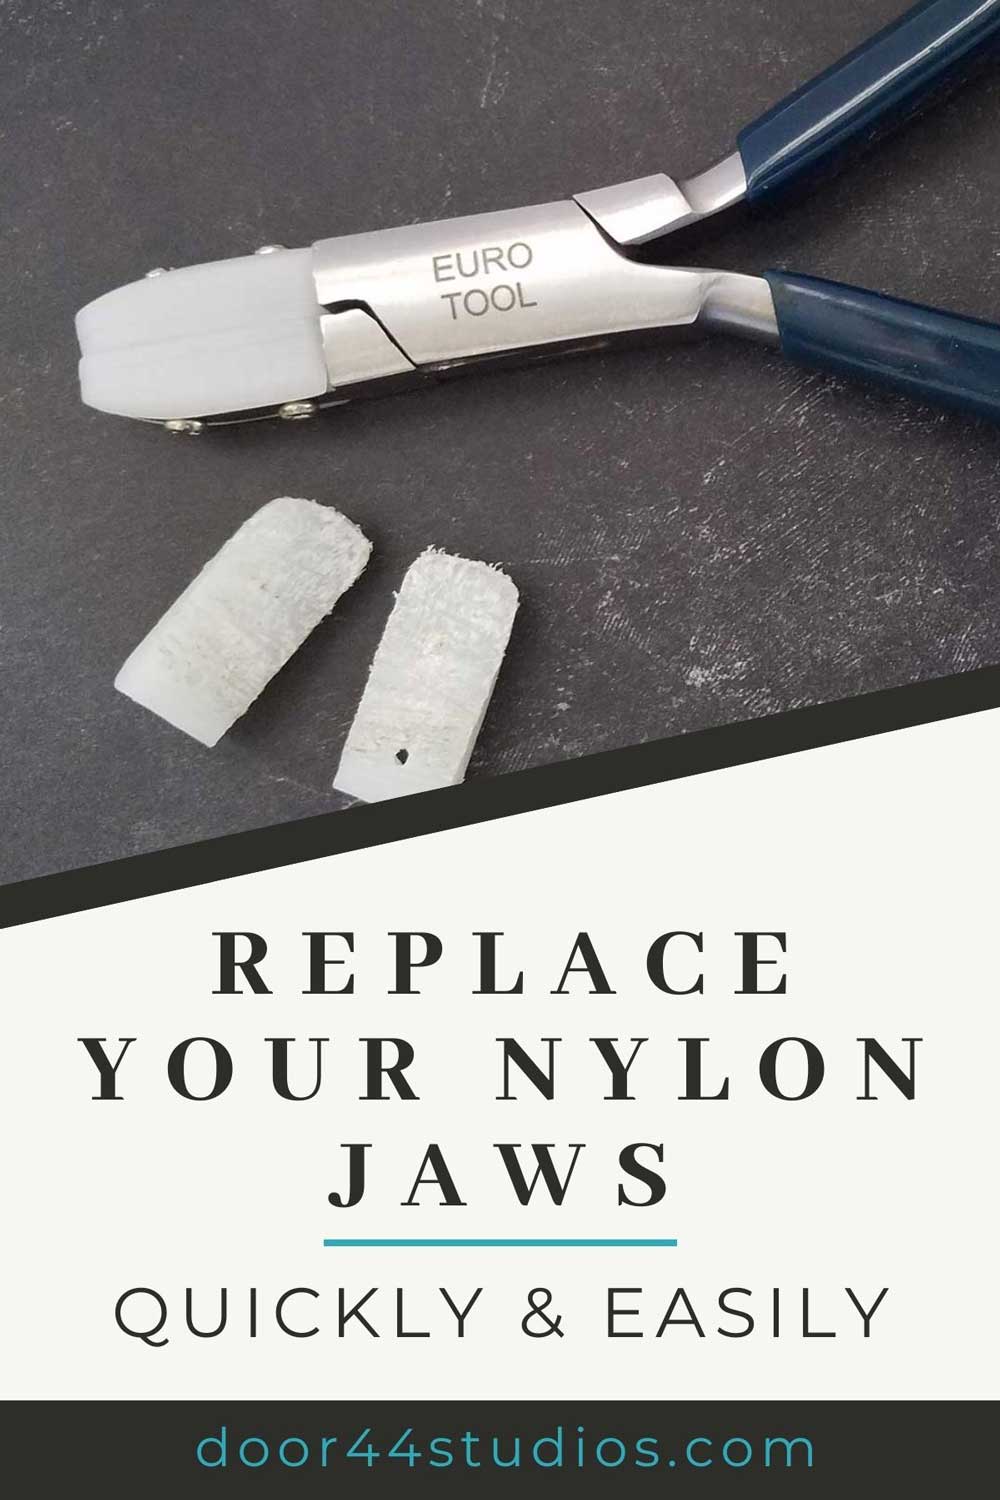 Learn how to replace your nylon jaws quickly and easily with my free tutorial! I've even included links to sources for replacement parts. So, you'll never have to search for the right replacement pads again!